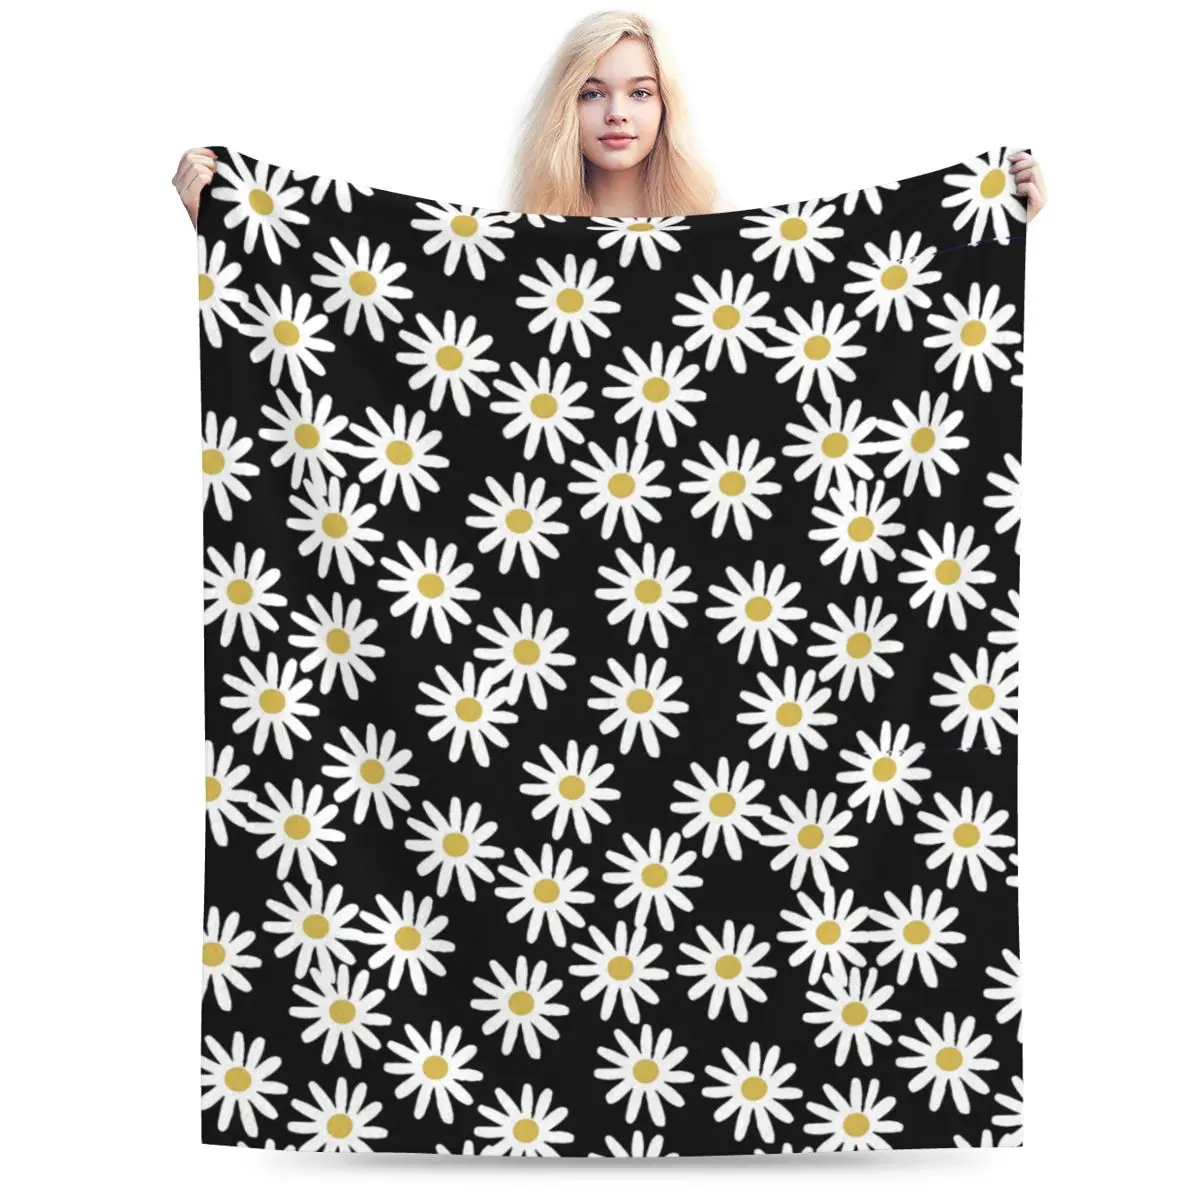 

Love Daisy Floral Soft Flannel Throw Blanket for Couch Bed Sofa Cover Blanket Warm Blankets Travel Blanket